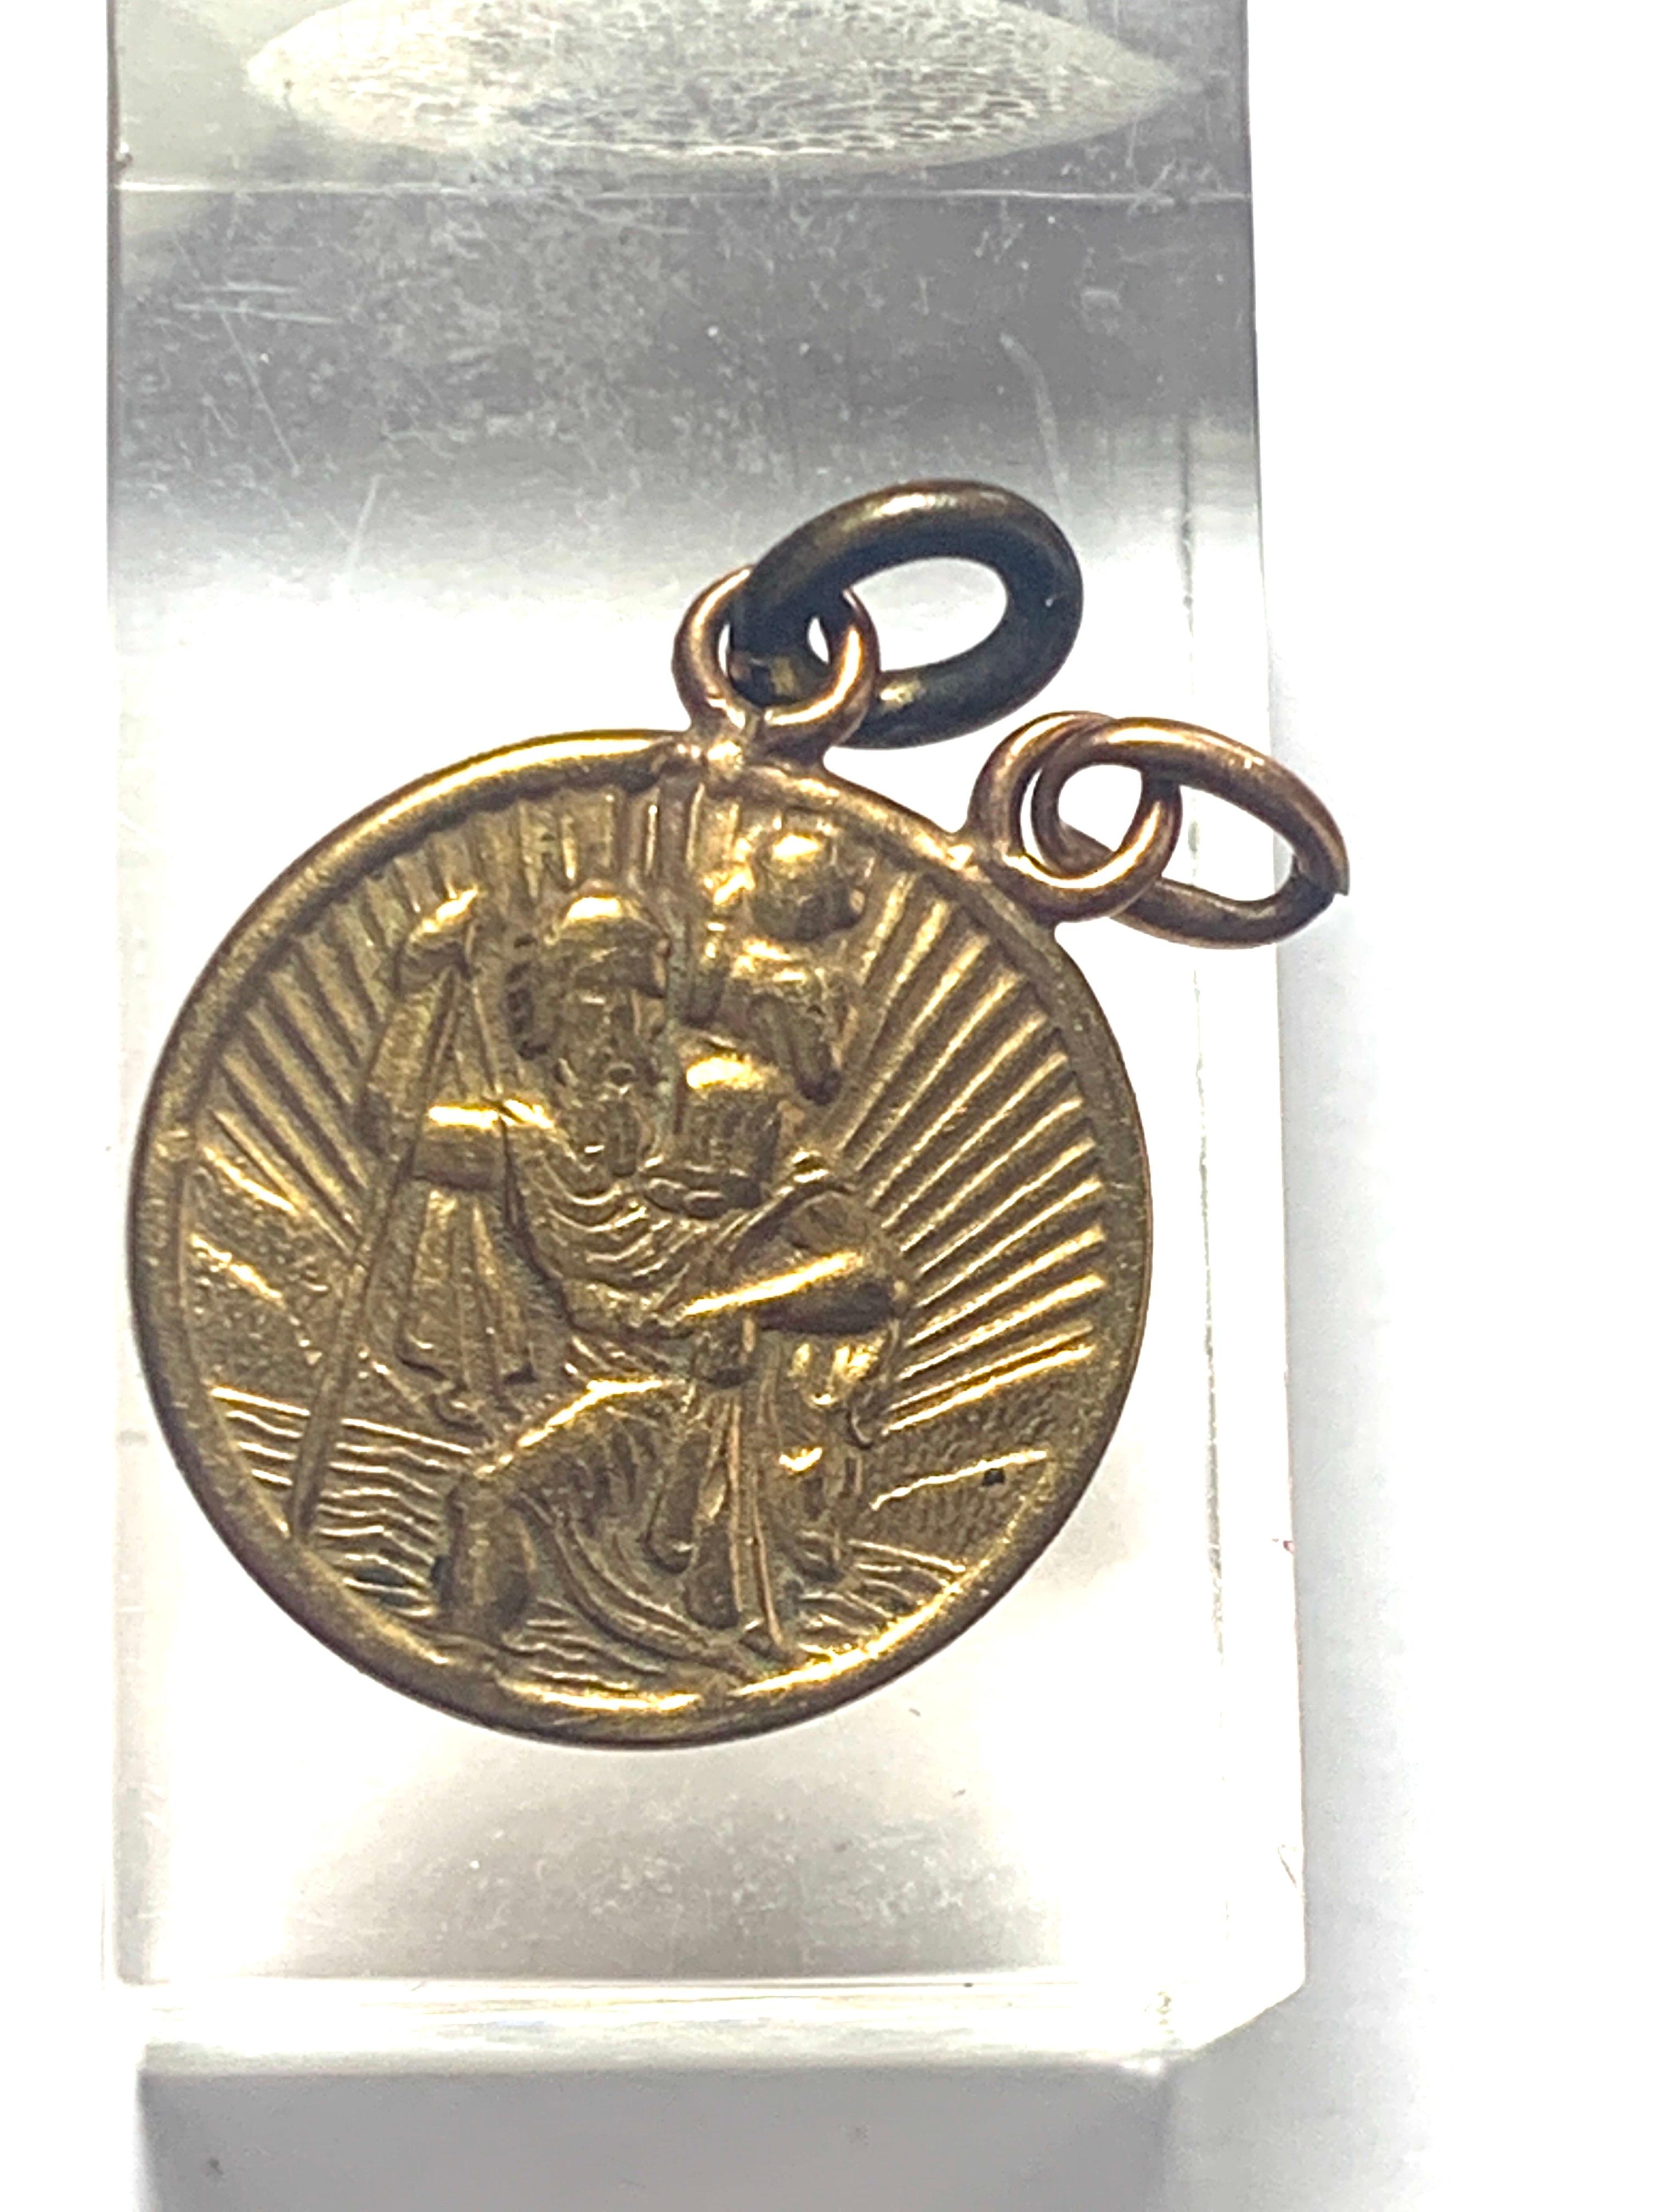 Rare Antique St.Christophers Pendant by Charles Horner of Chester
with double bail - to attach to chain
Full British hallmarks
Circa late 1800s
diameter 19mm

Weight 2.17 grams